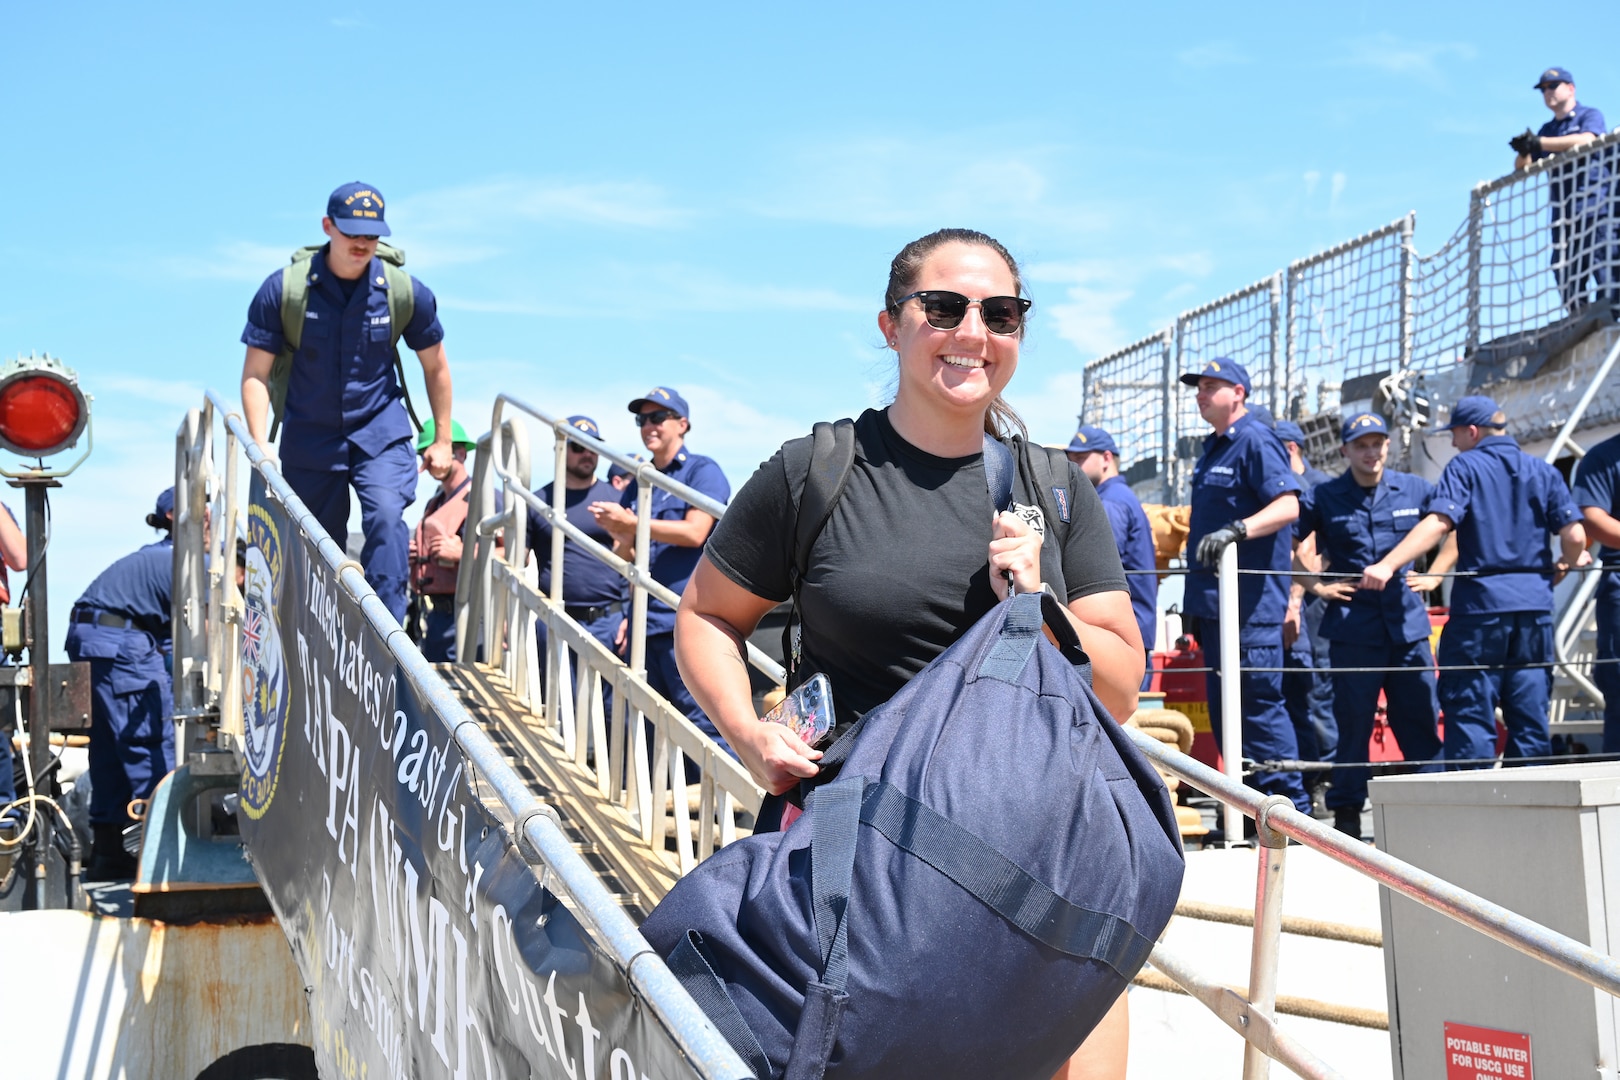 Crew members of the U.S. Coast Guard Cutter Tampa (WMEC 902) disembark at the pier, Sept. 5, 2023, in Portsmouth, Virginia following a 67-day patrol in the Florida Straits and Windward Passage. Tampa deployed in support of Homeland Security Task Force — Southeast and conducted maritime safety and security missions. (U.S. Coast Guard photo by Petty Officer 2nd Class Brandon Hillard)